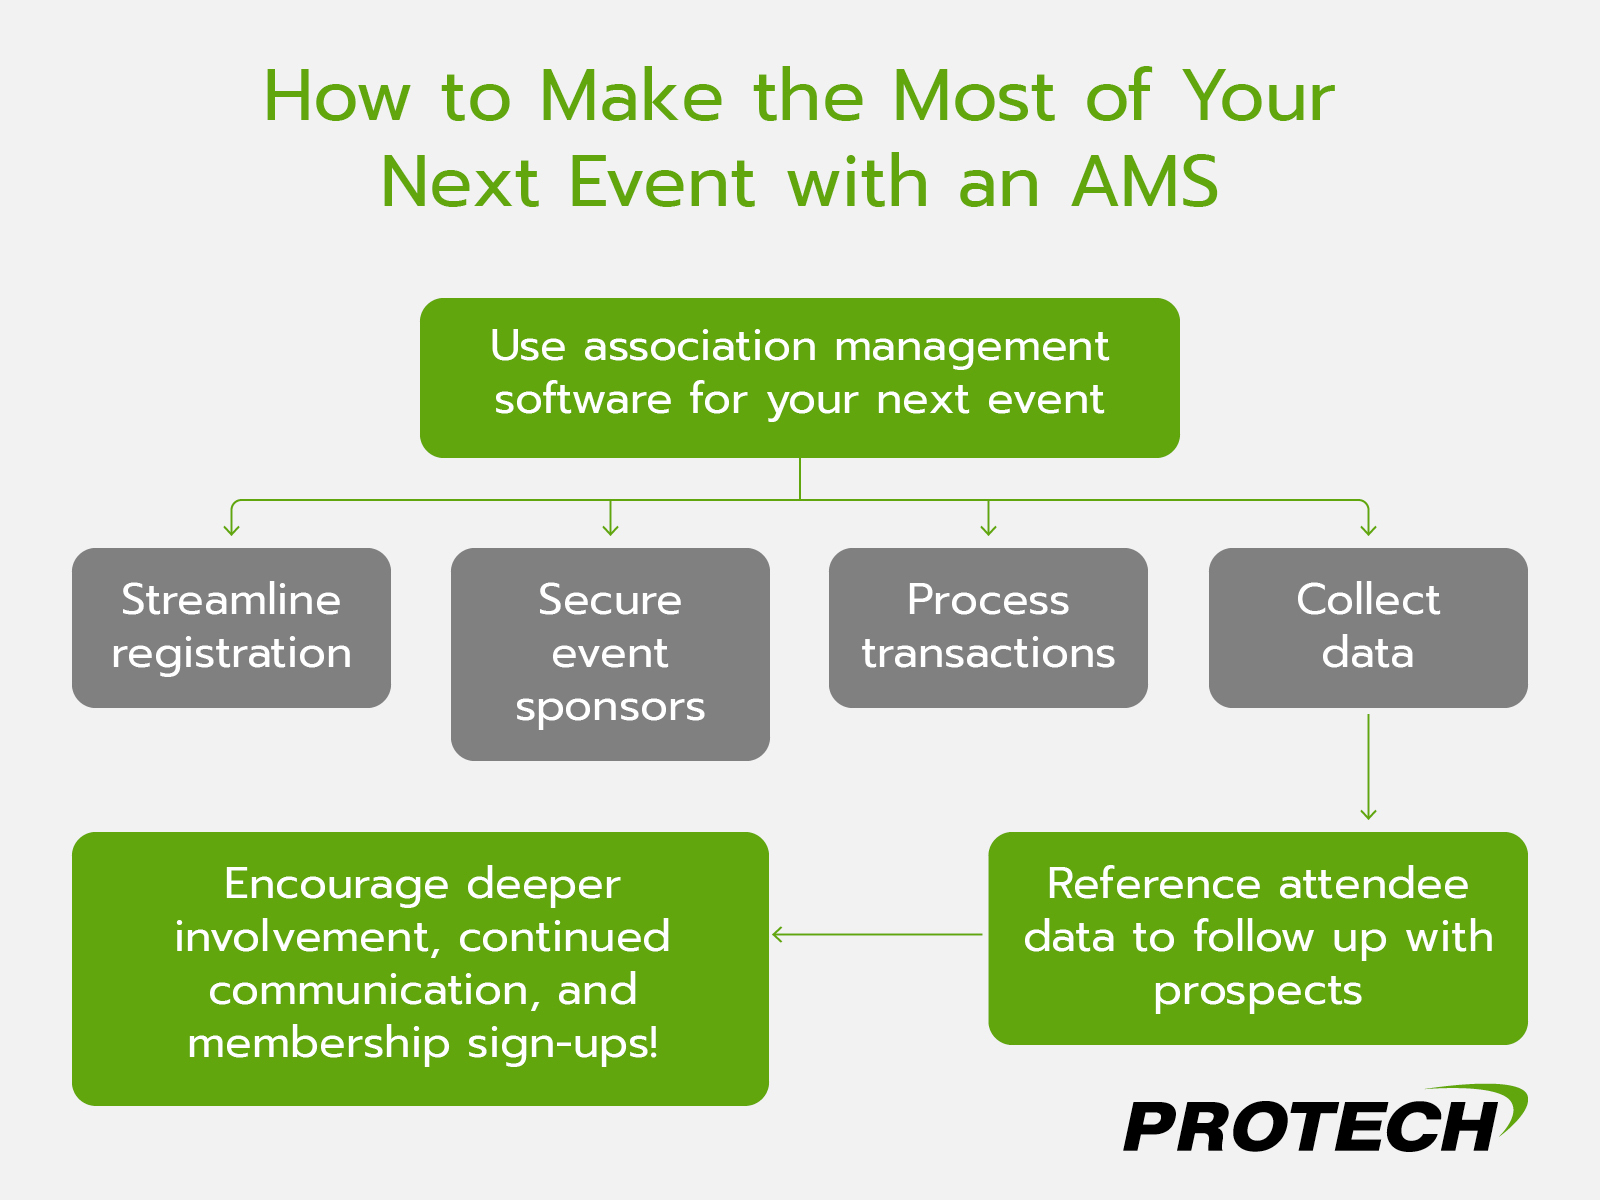 Follow this path to collect important member data that will help you make the most of your next event.